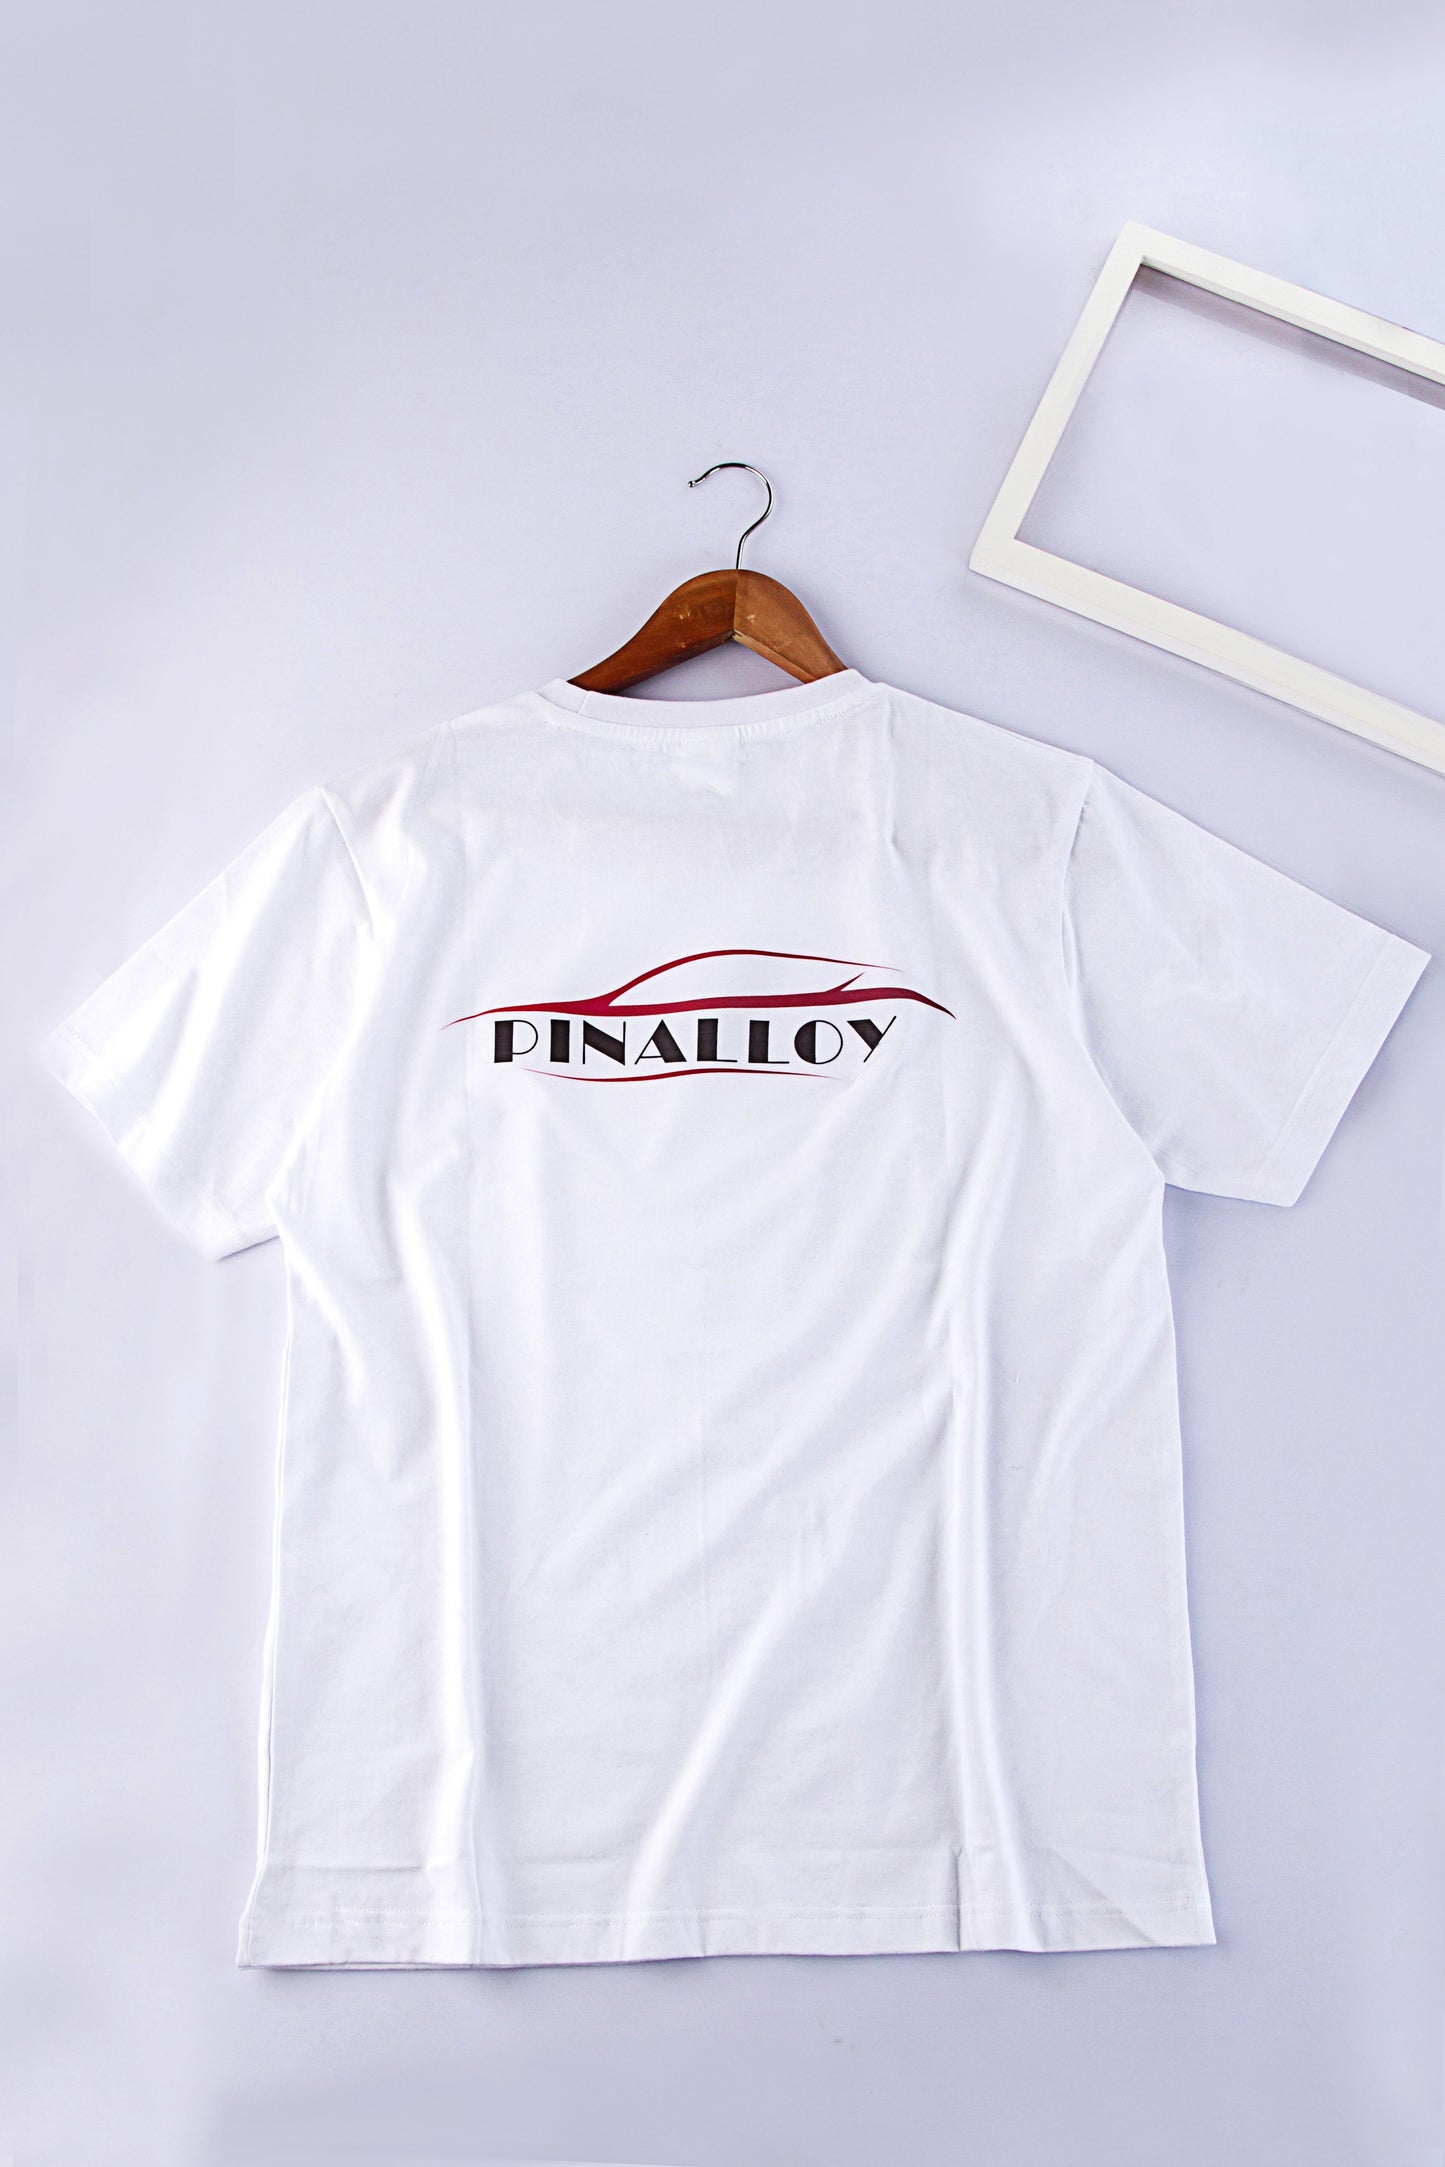 Pinalloy Classic Short Sleeve White Summer Round Neck Tee Cotton Printed T-Shirt - Pinalloy Online Auto Accessories Lightweight Car Kit 